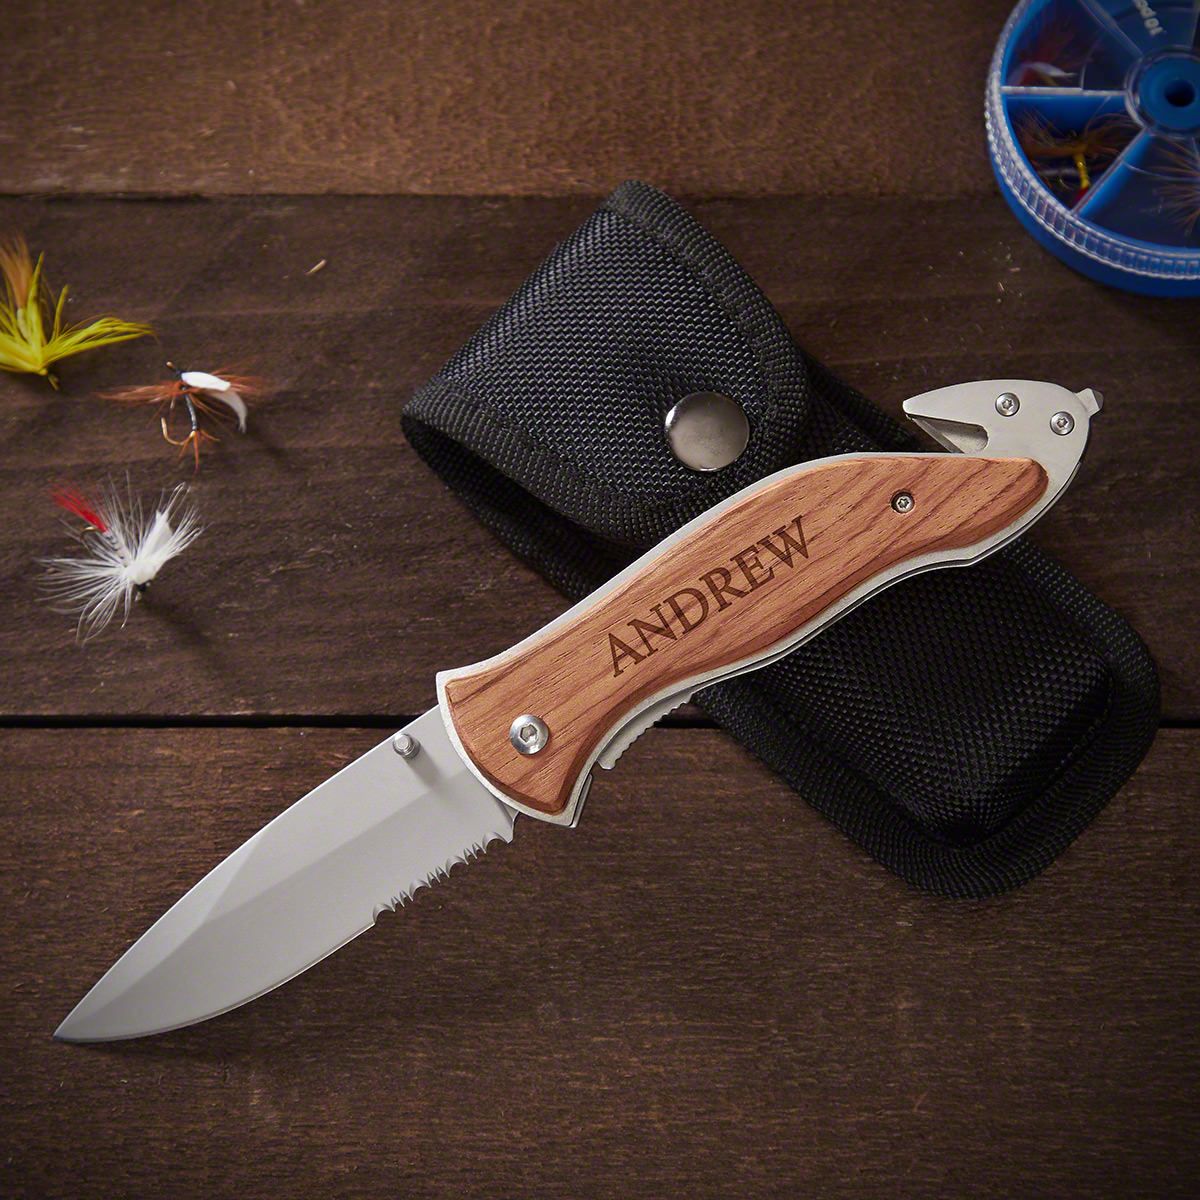 https://images.homewetbar.com/media/catalog/product/7/4/7400-personalized-liner-lock-knife-with-sleeve.jpg?store=default&image-type=image